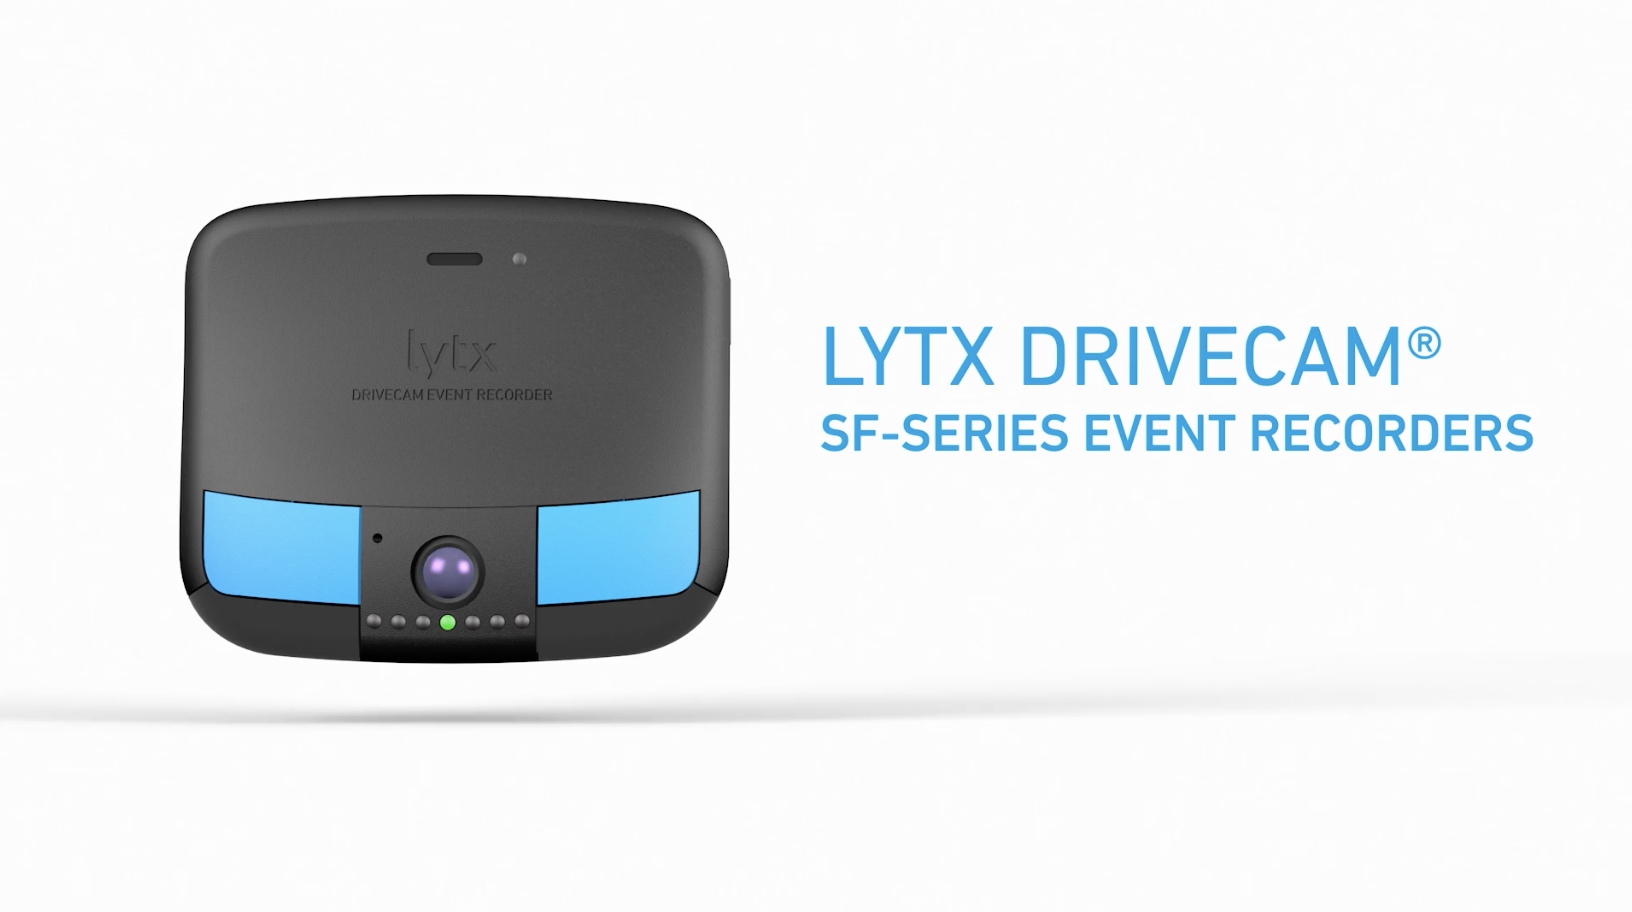 Lytx DriveCam Series Event Recorders